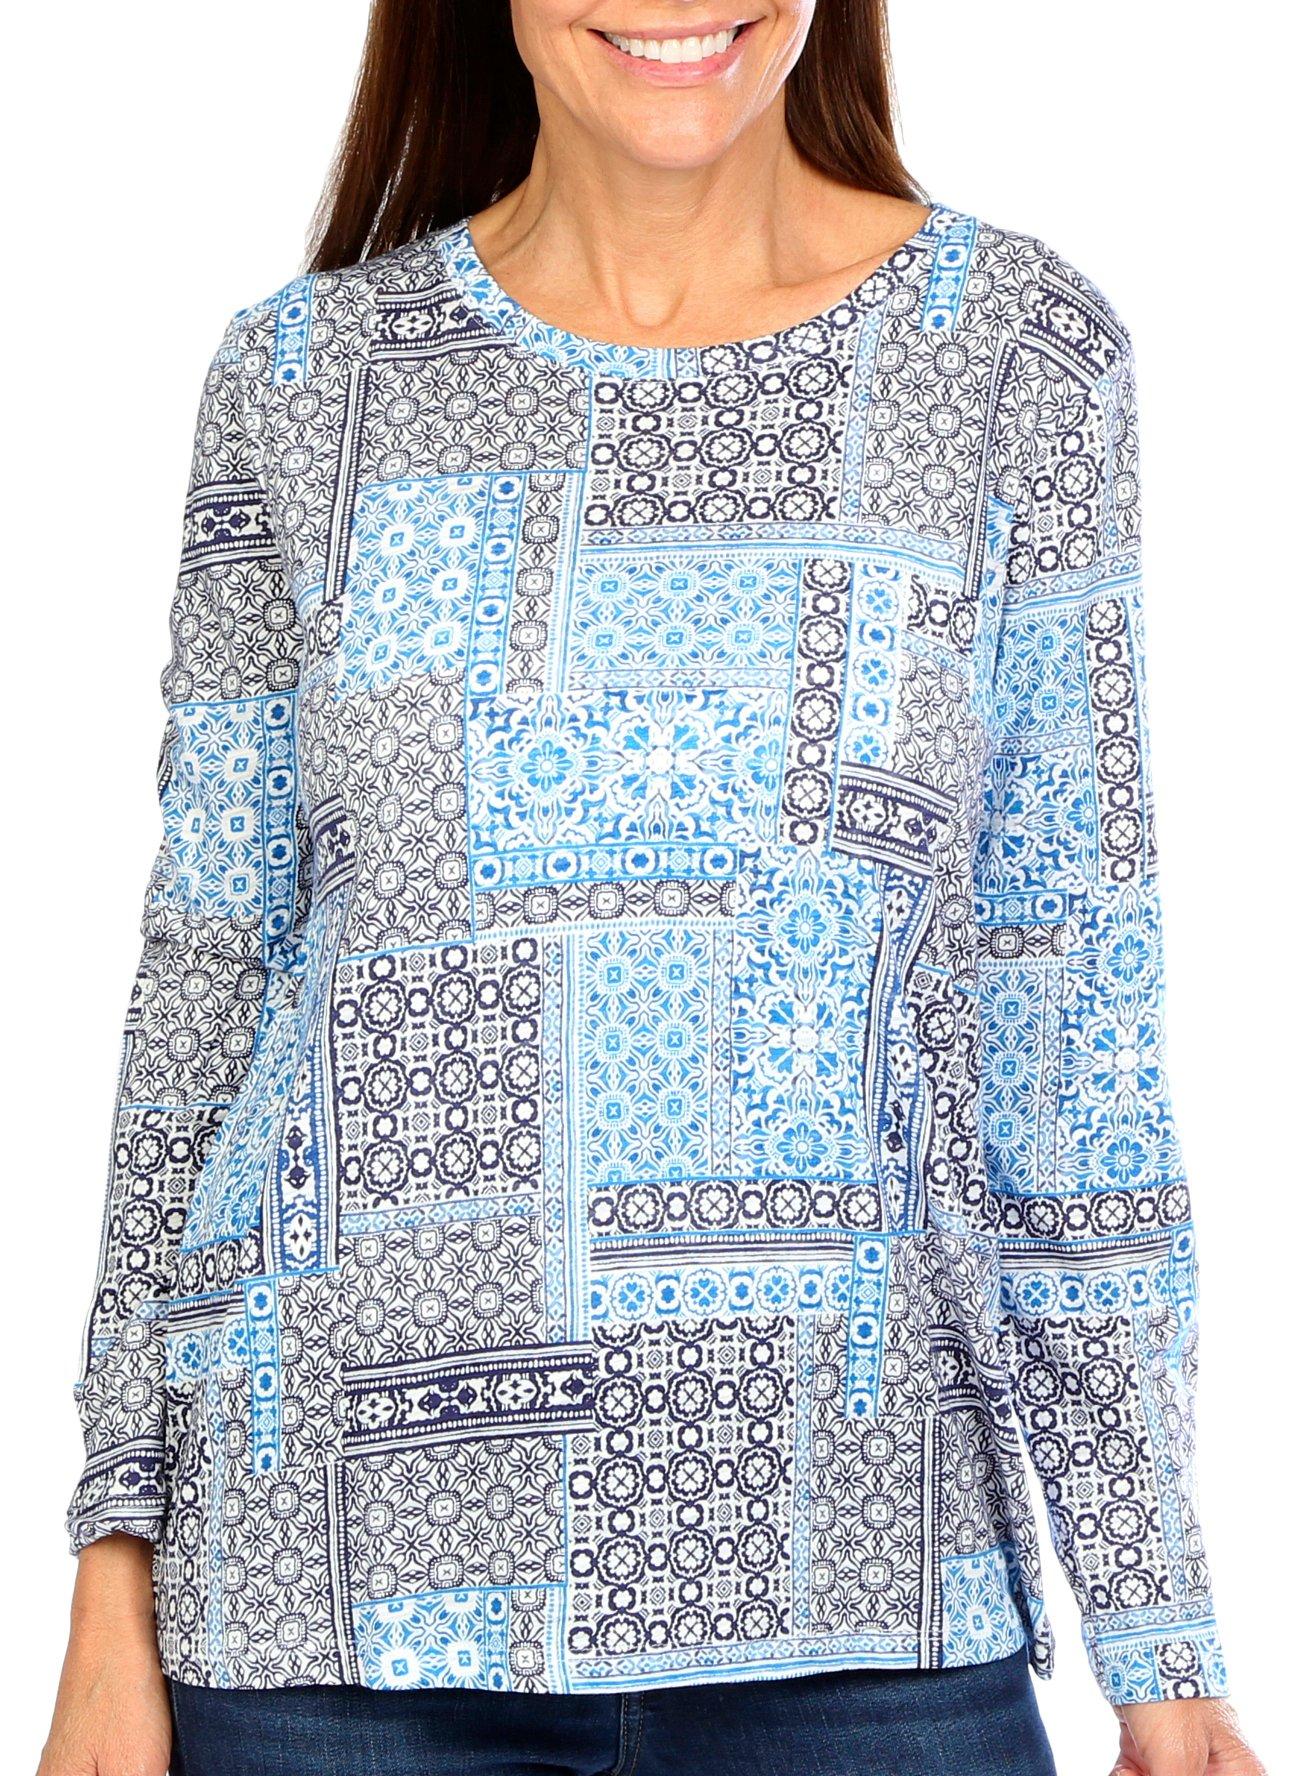 Blue Sol Womens Patchwork Long Sleeve Top